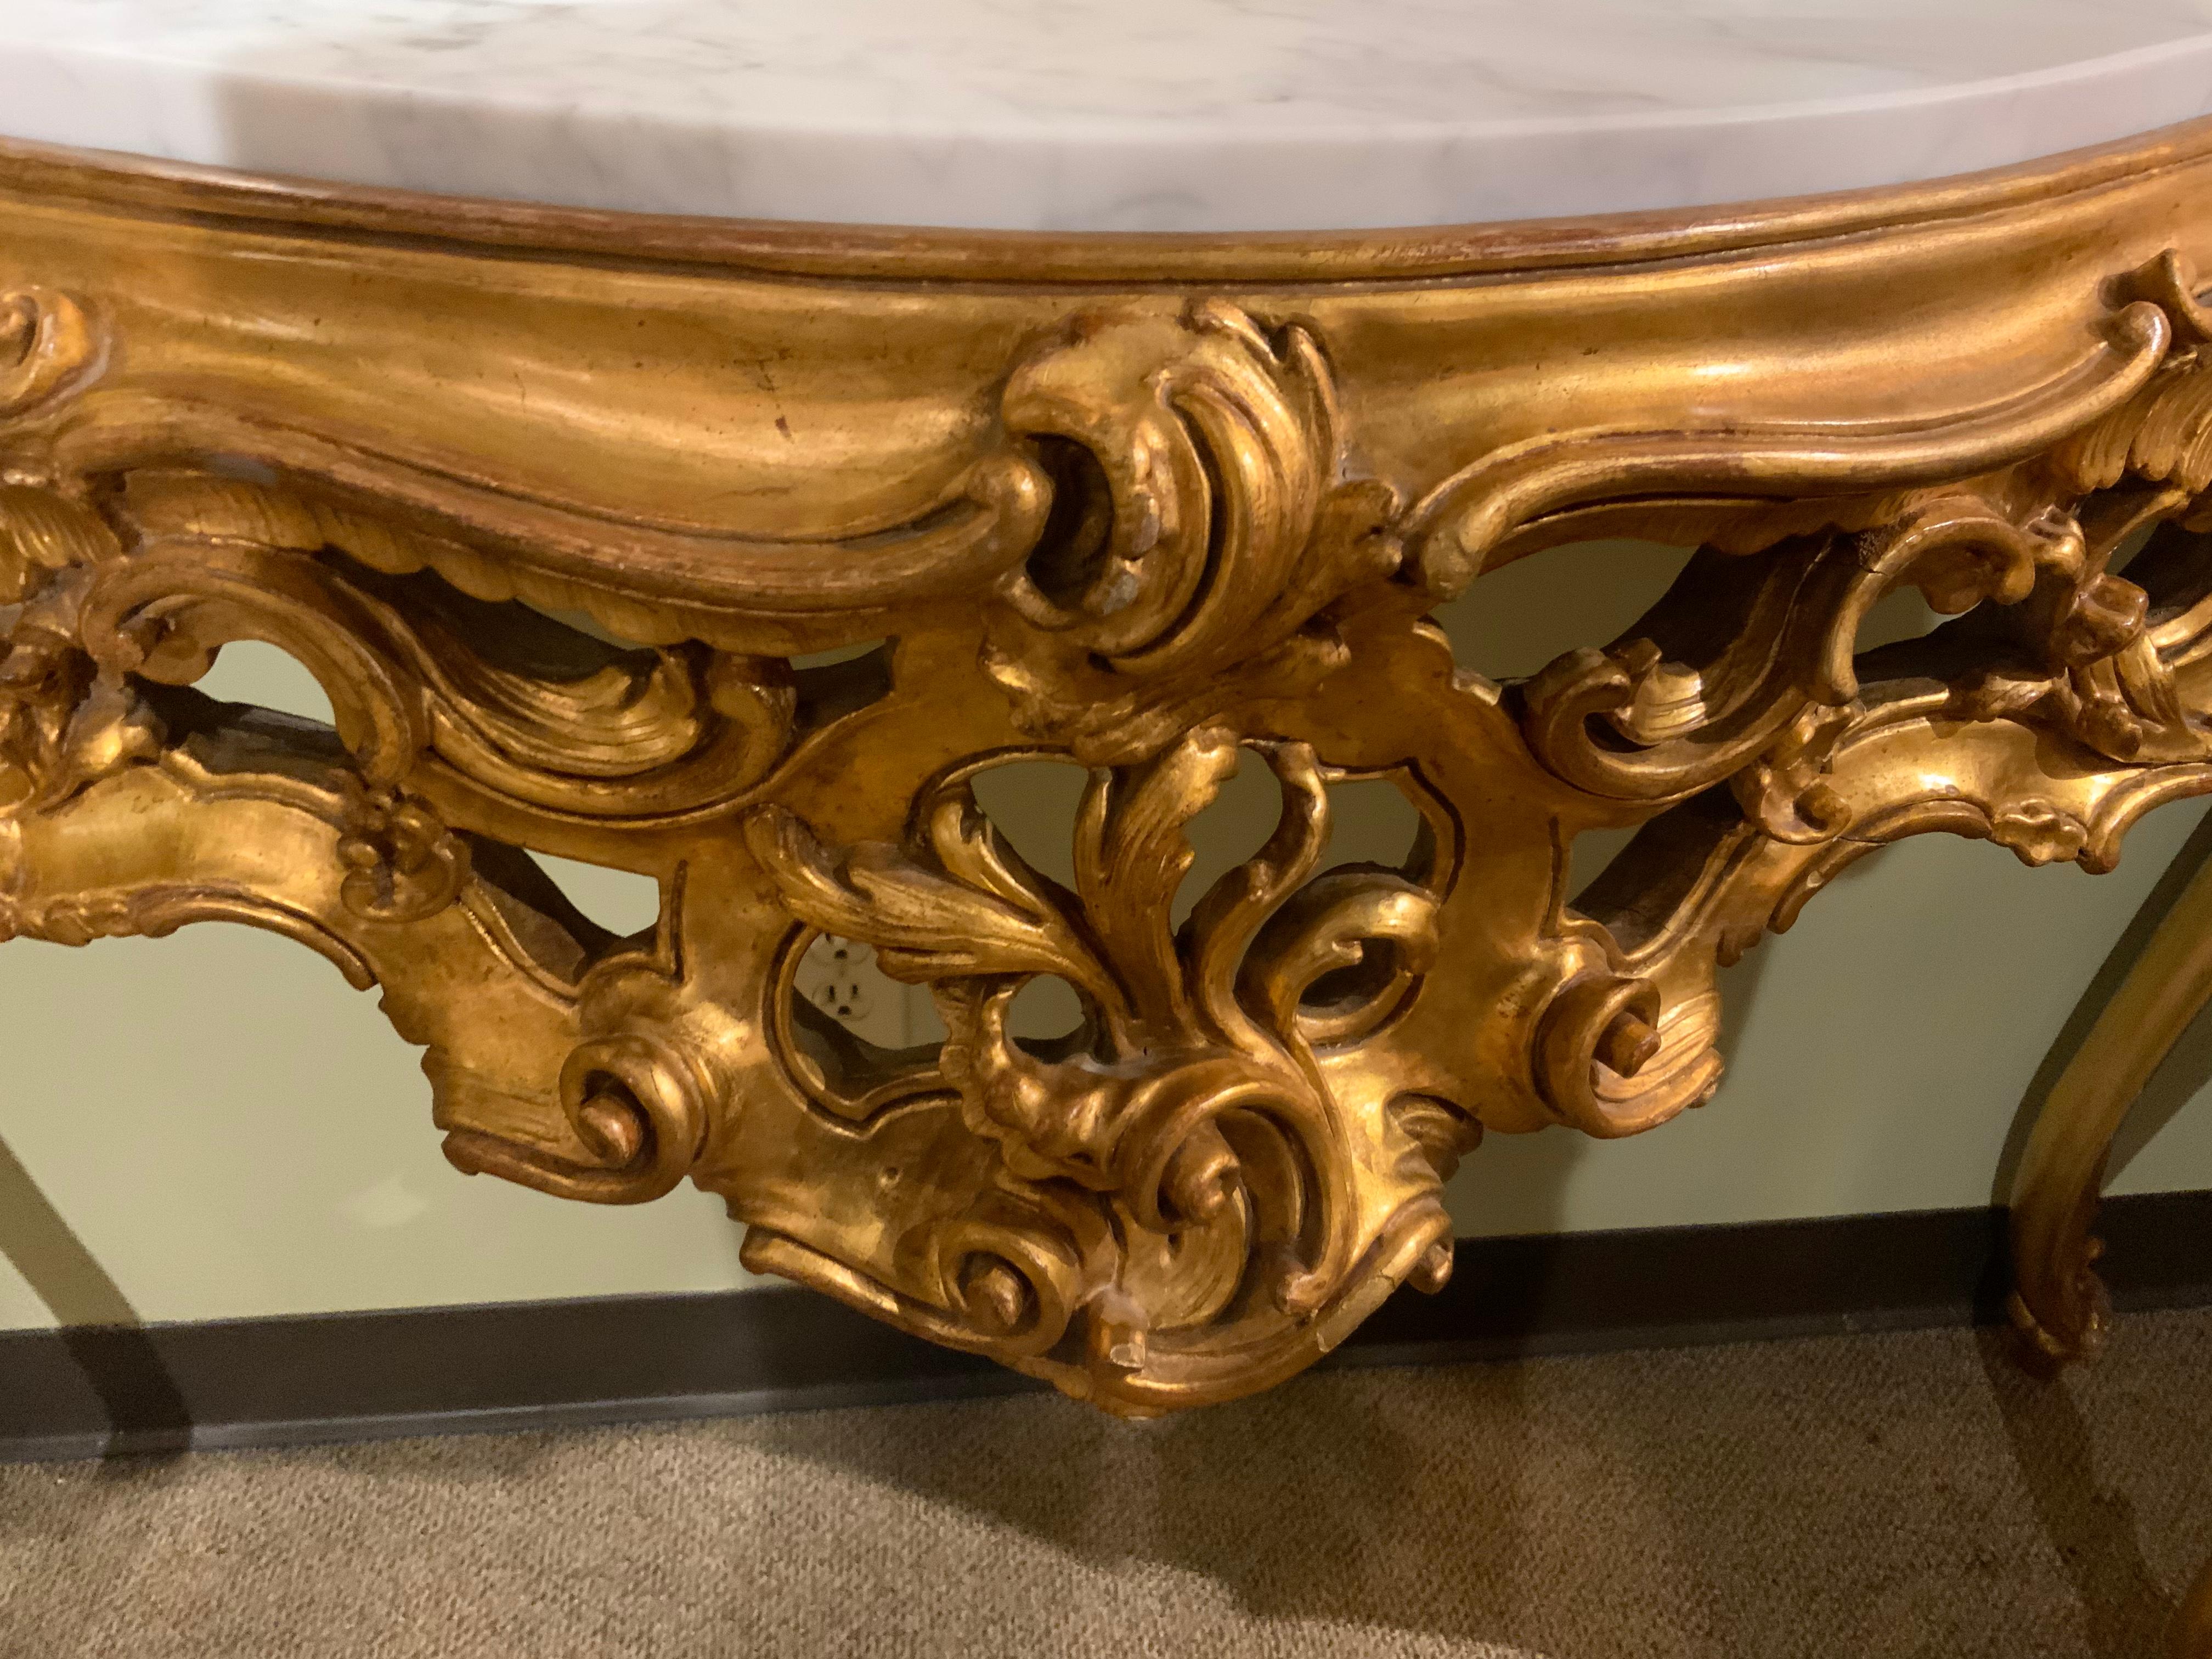 Exceptional gilding and carving on this console, the top with a conforming inset white marble,
The aprons are pierced and carved with scrolls and foliate motifs, raised on cabriole legs